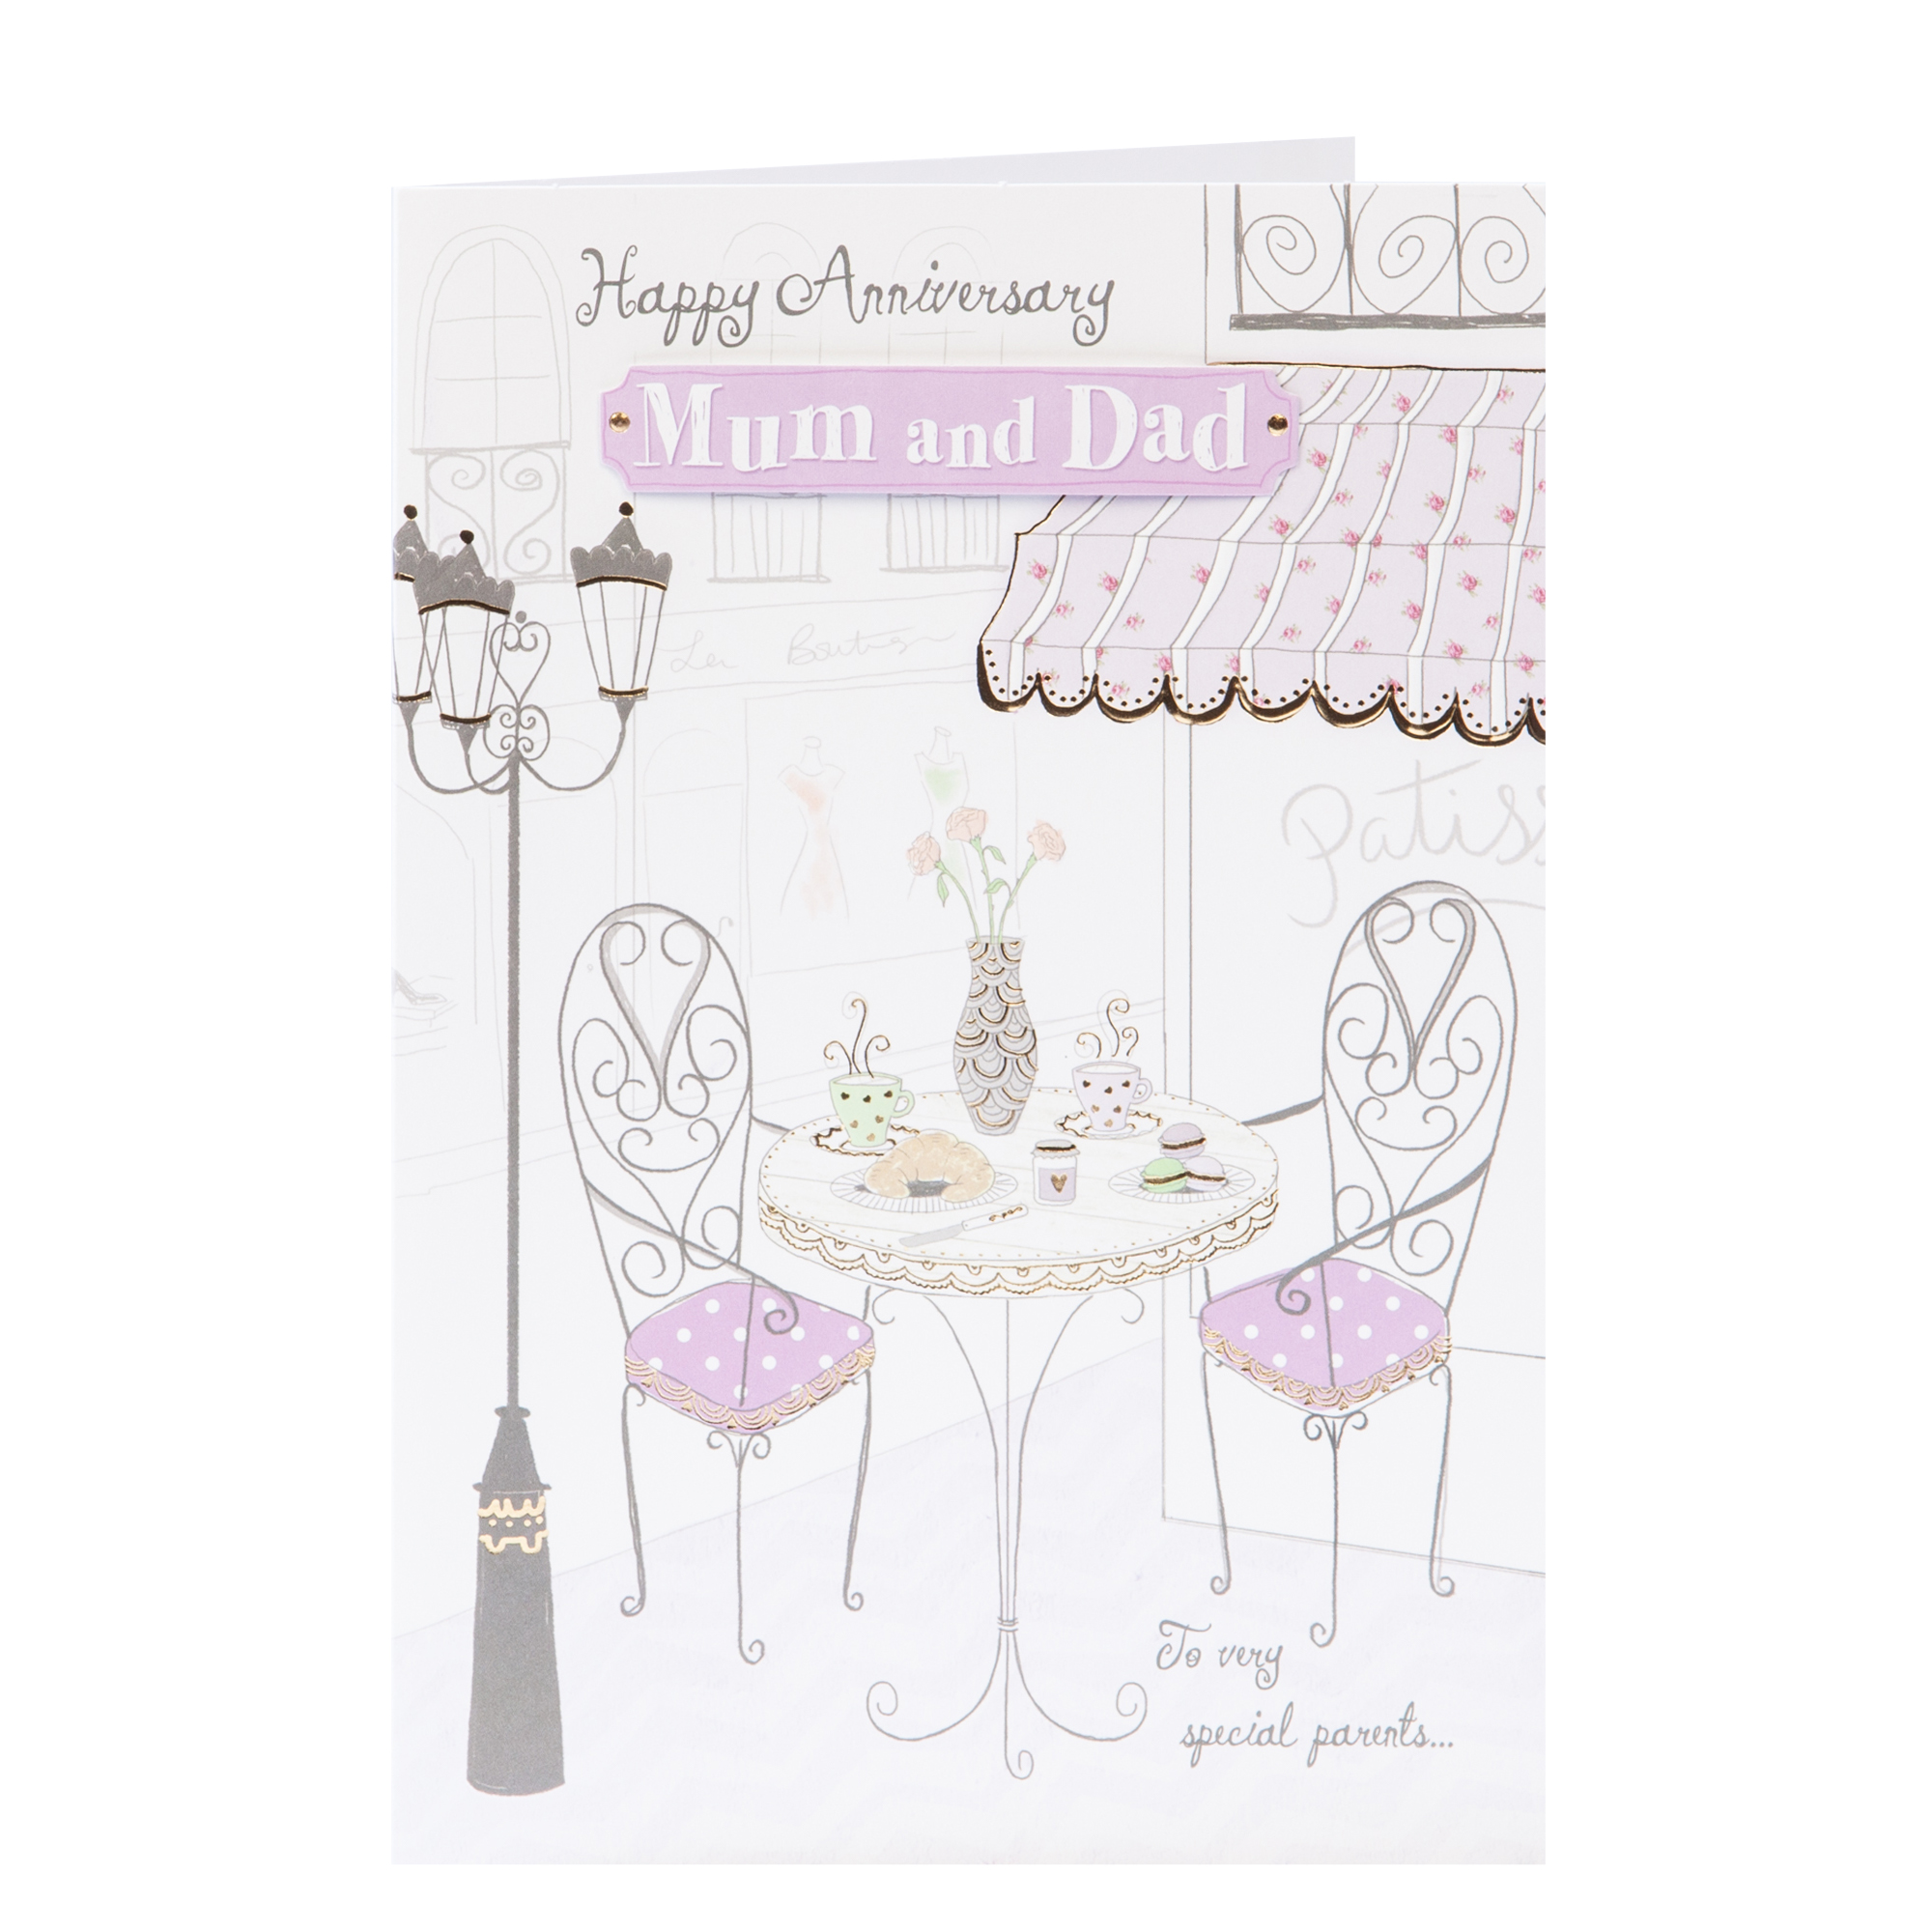 Anniversary Card - Very Special parents